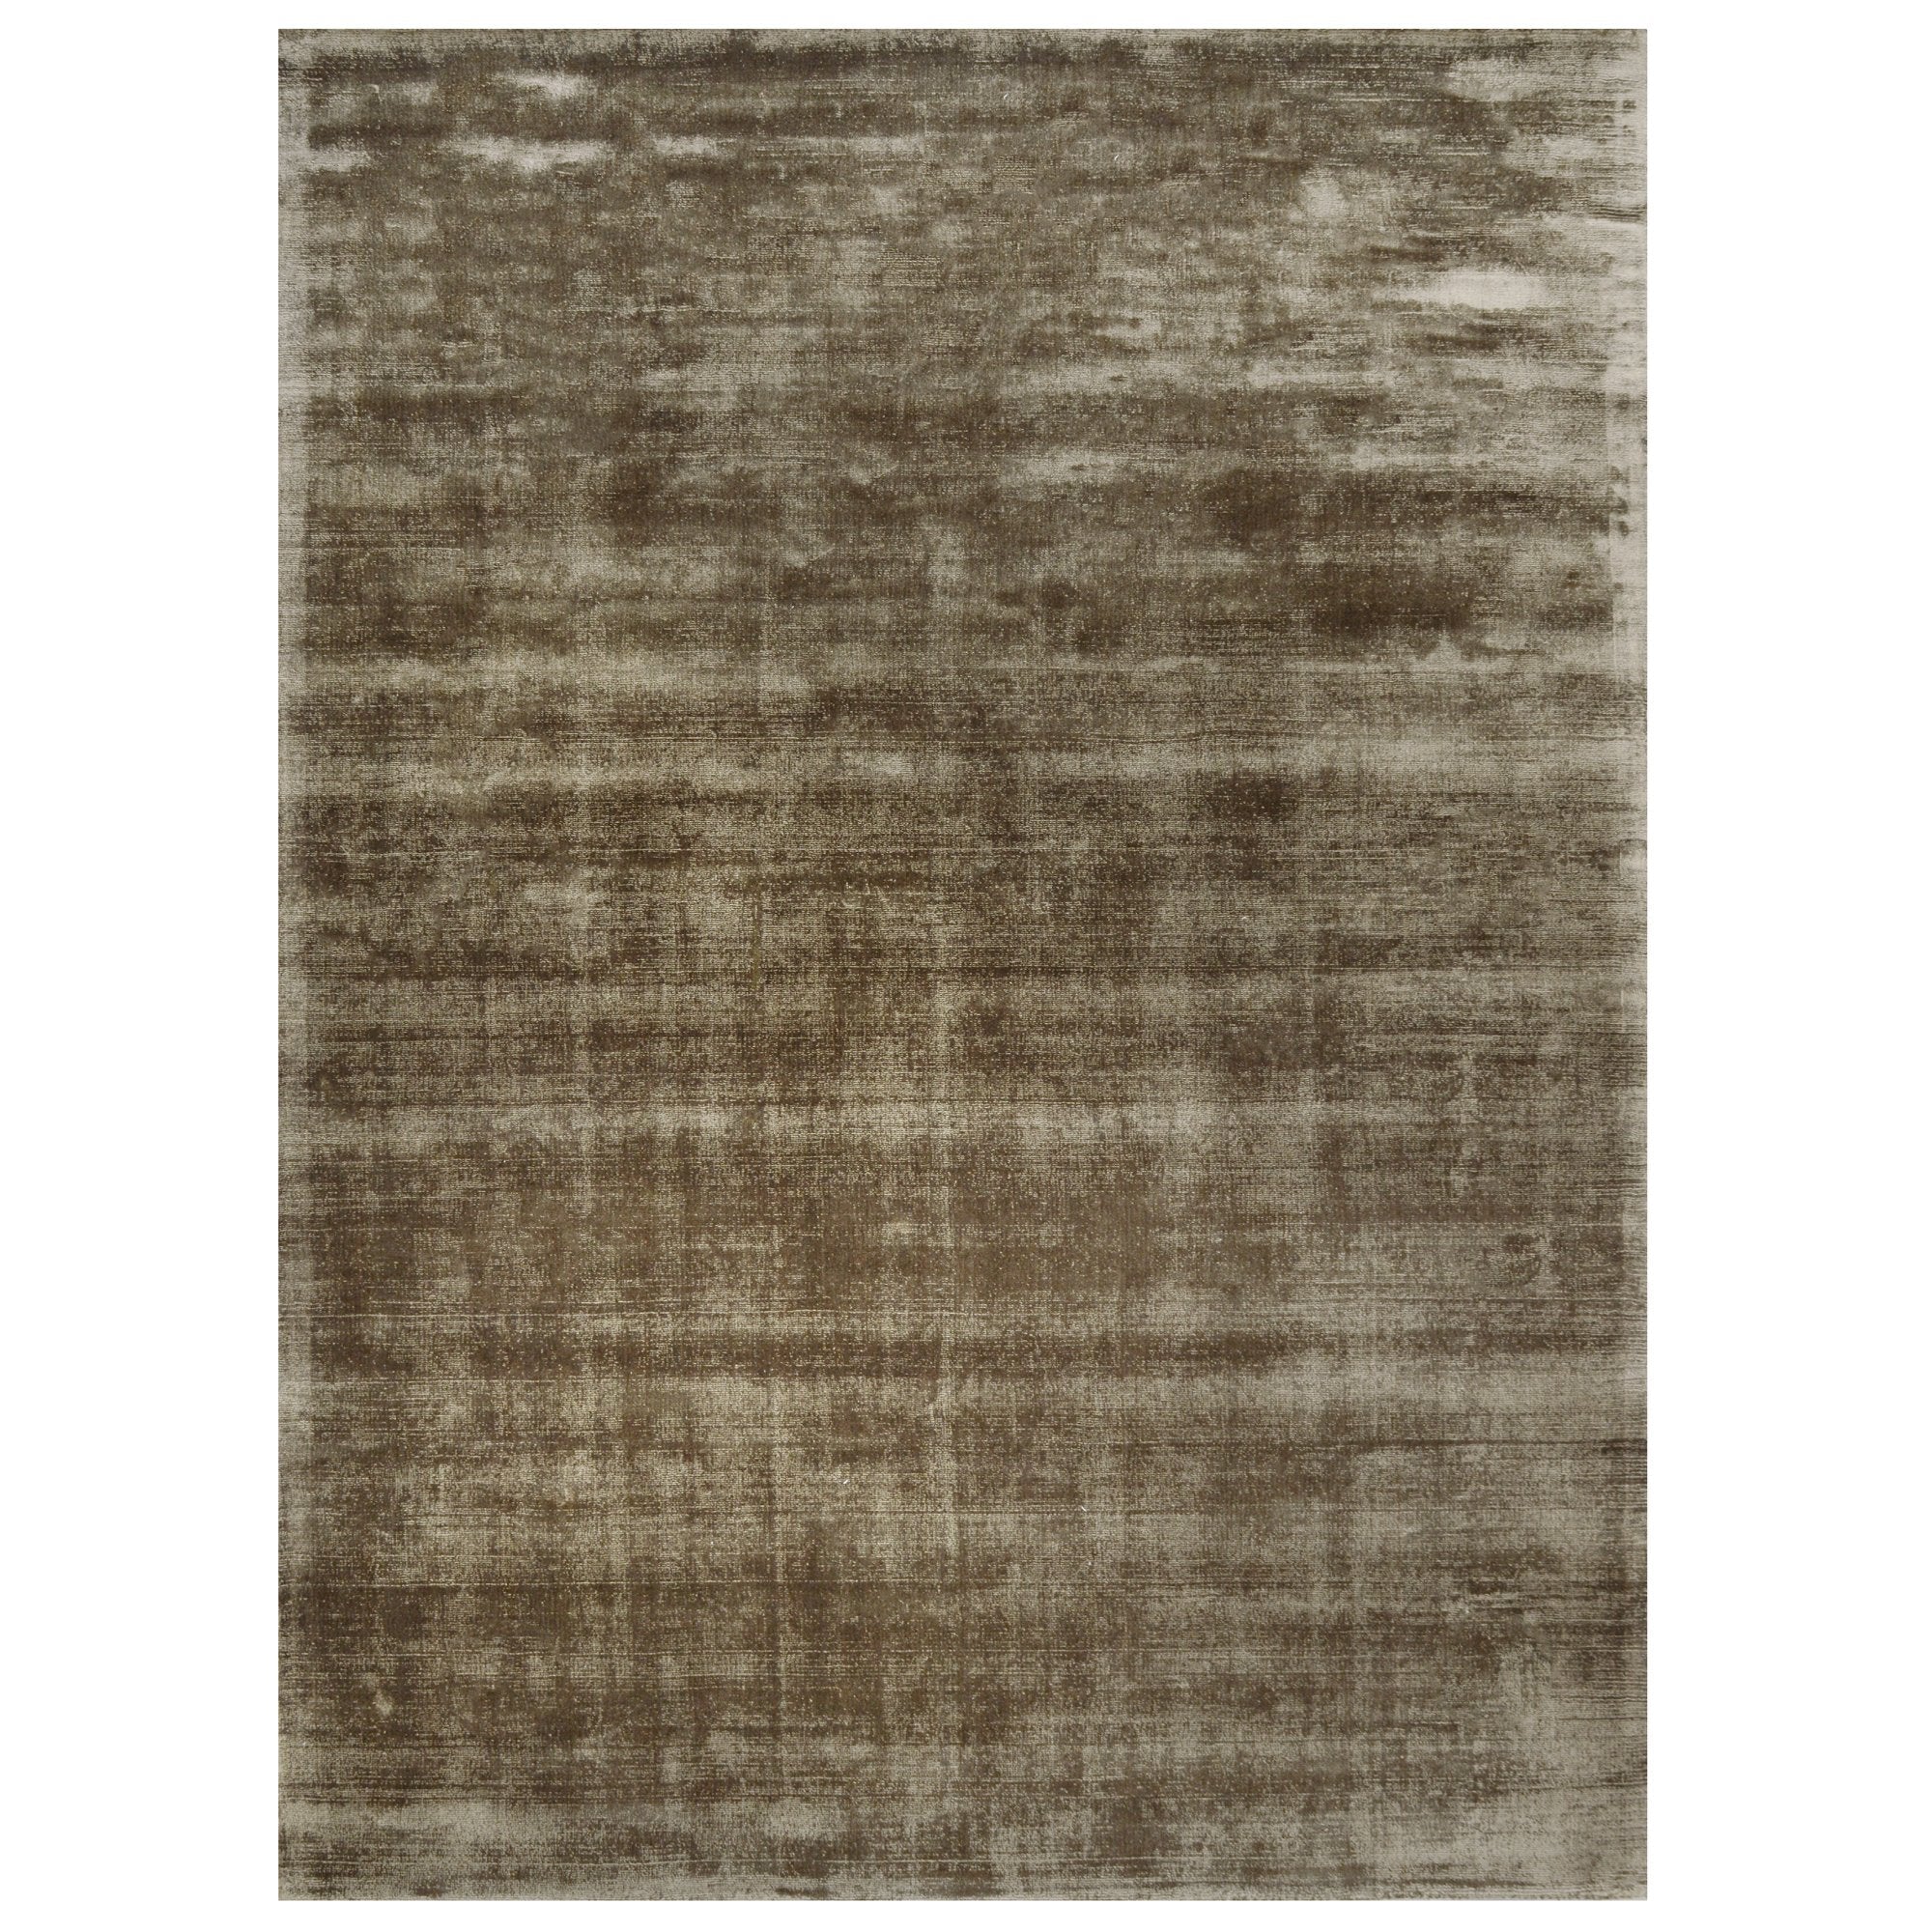 Sand Color Rugs Tencel Ultra-Soft Hand Knotted in India 5' X 8' Rugs for Dining Room